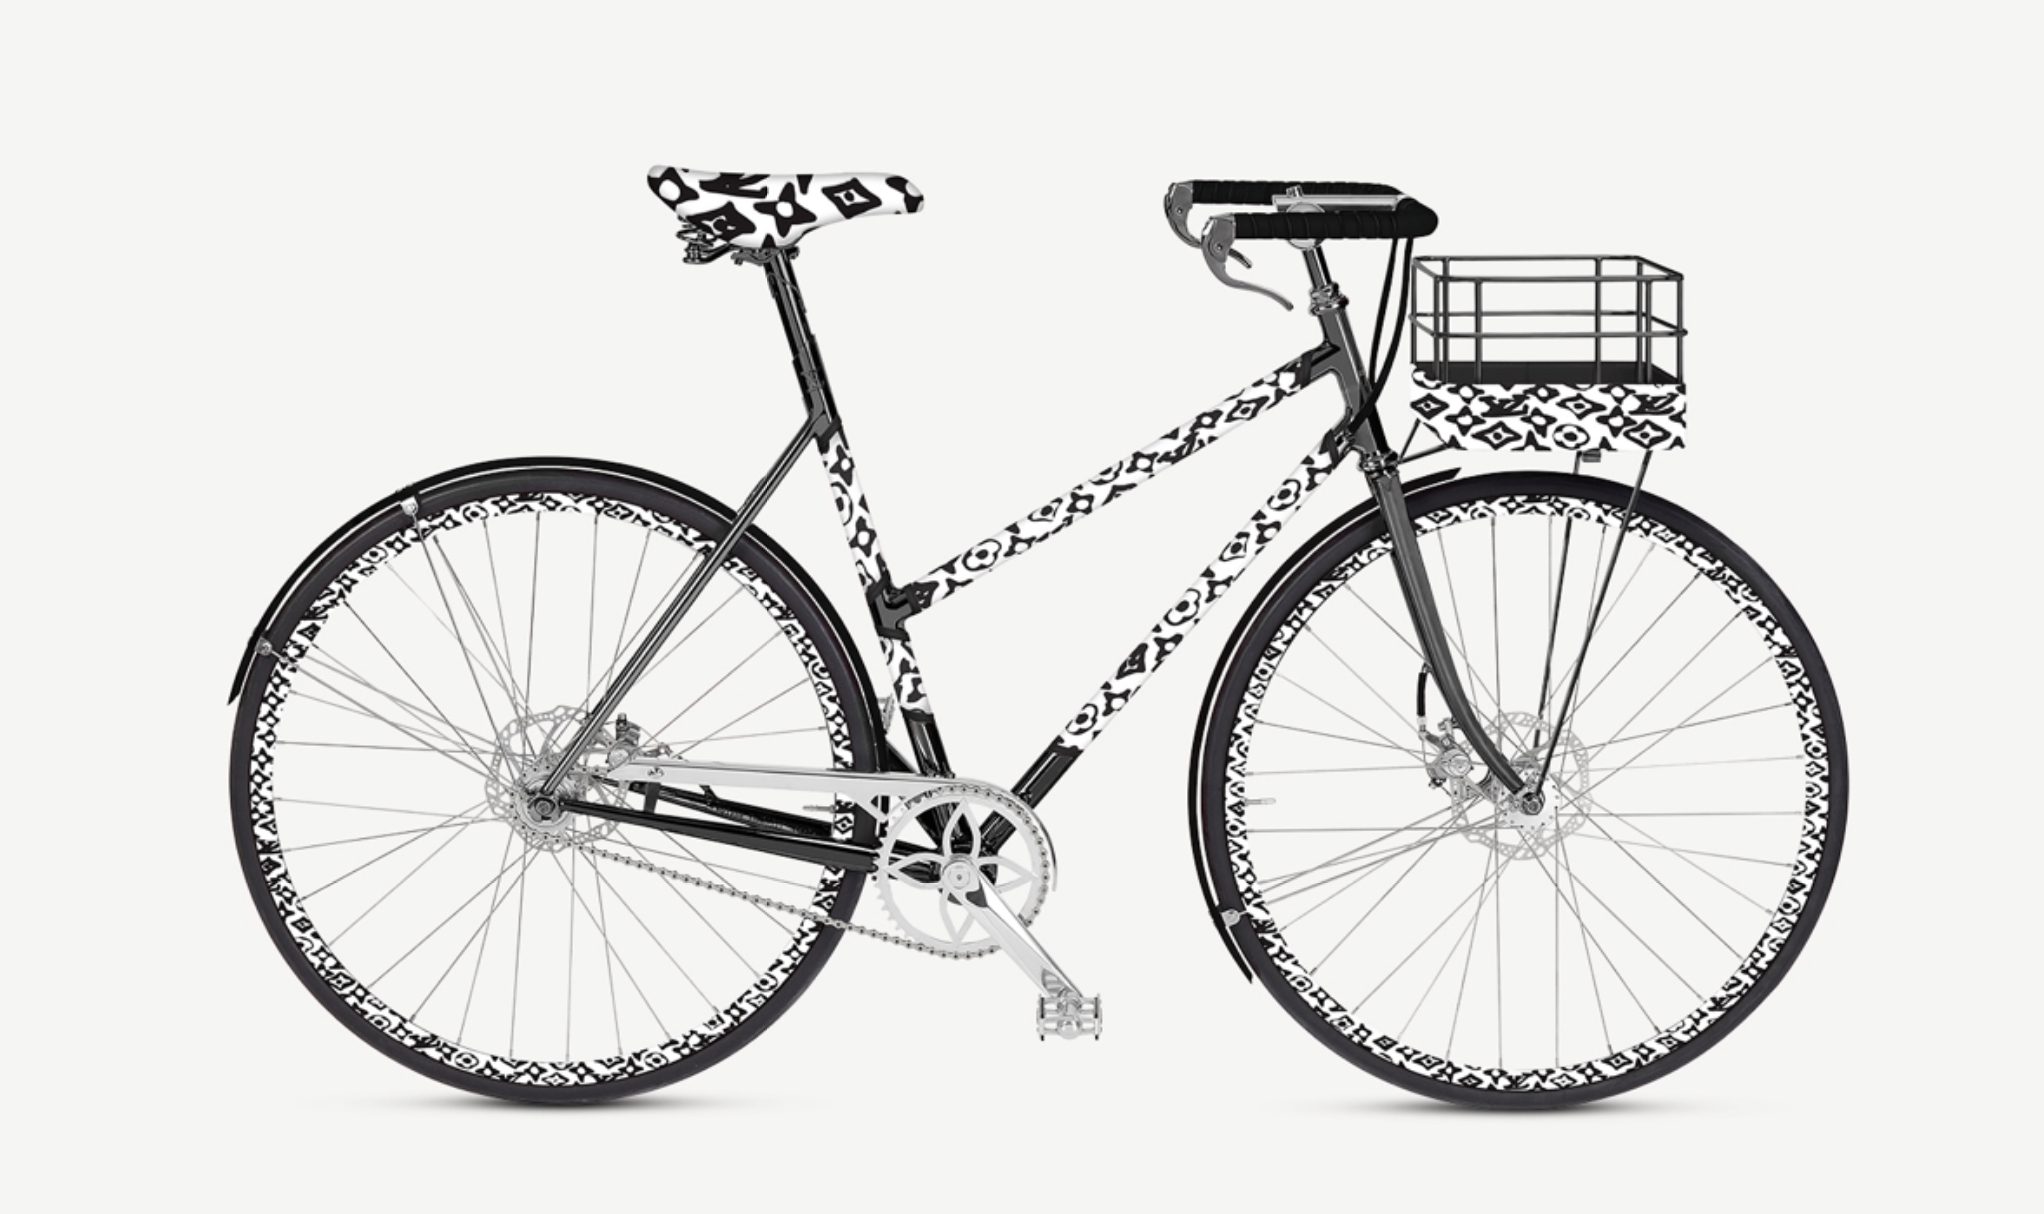 With a retro design, the French brands Louis Vuitton and Maison Tamboite  have come together to launch the LV Bike line of…